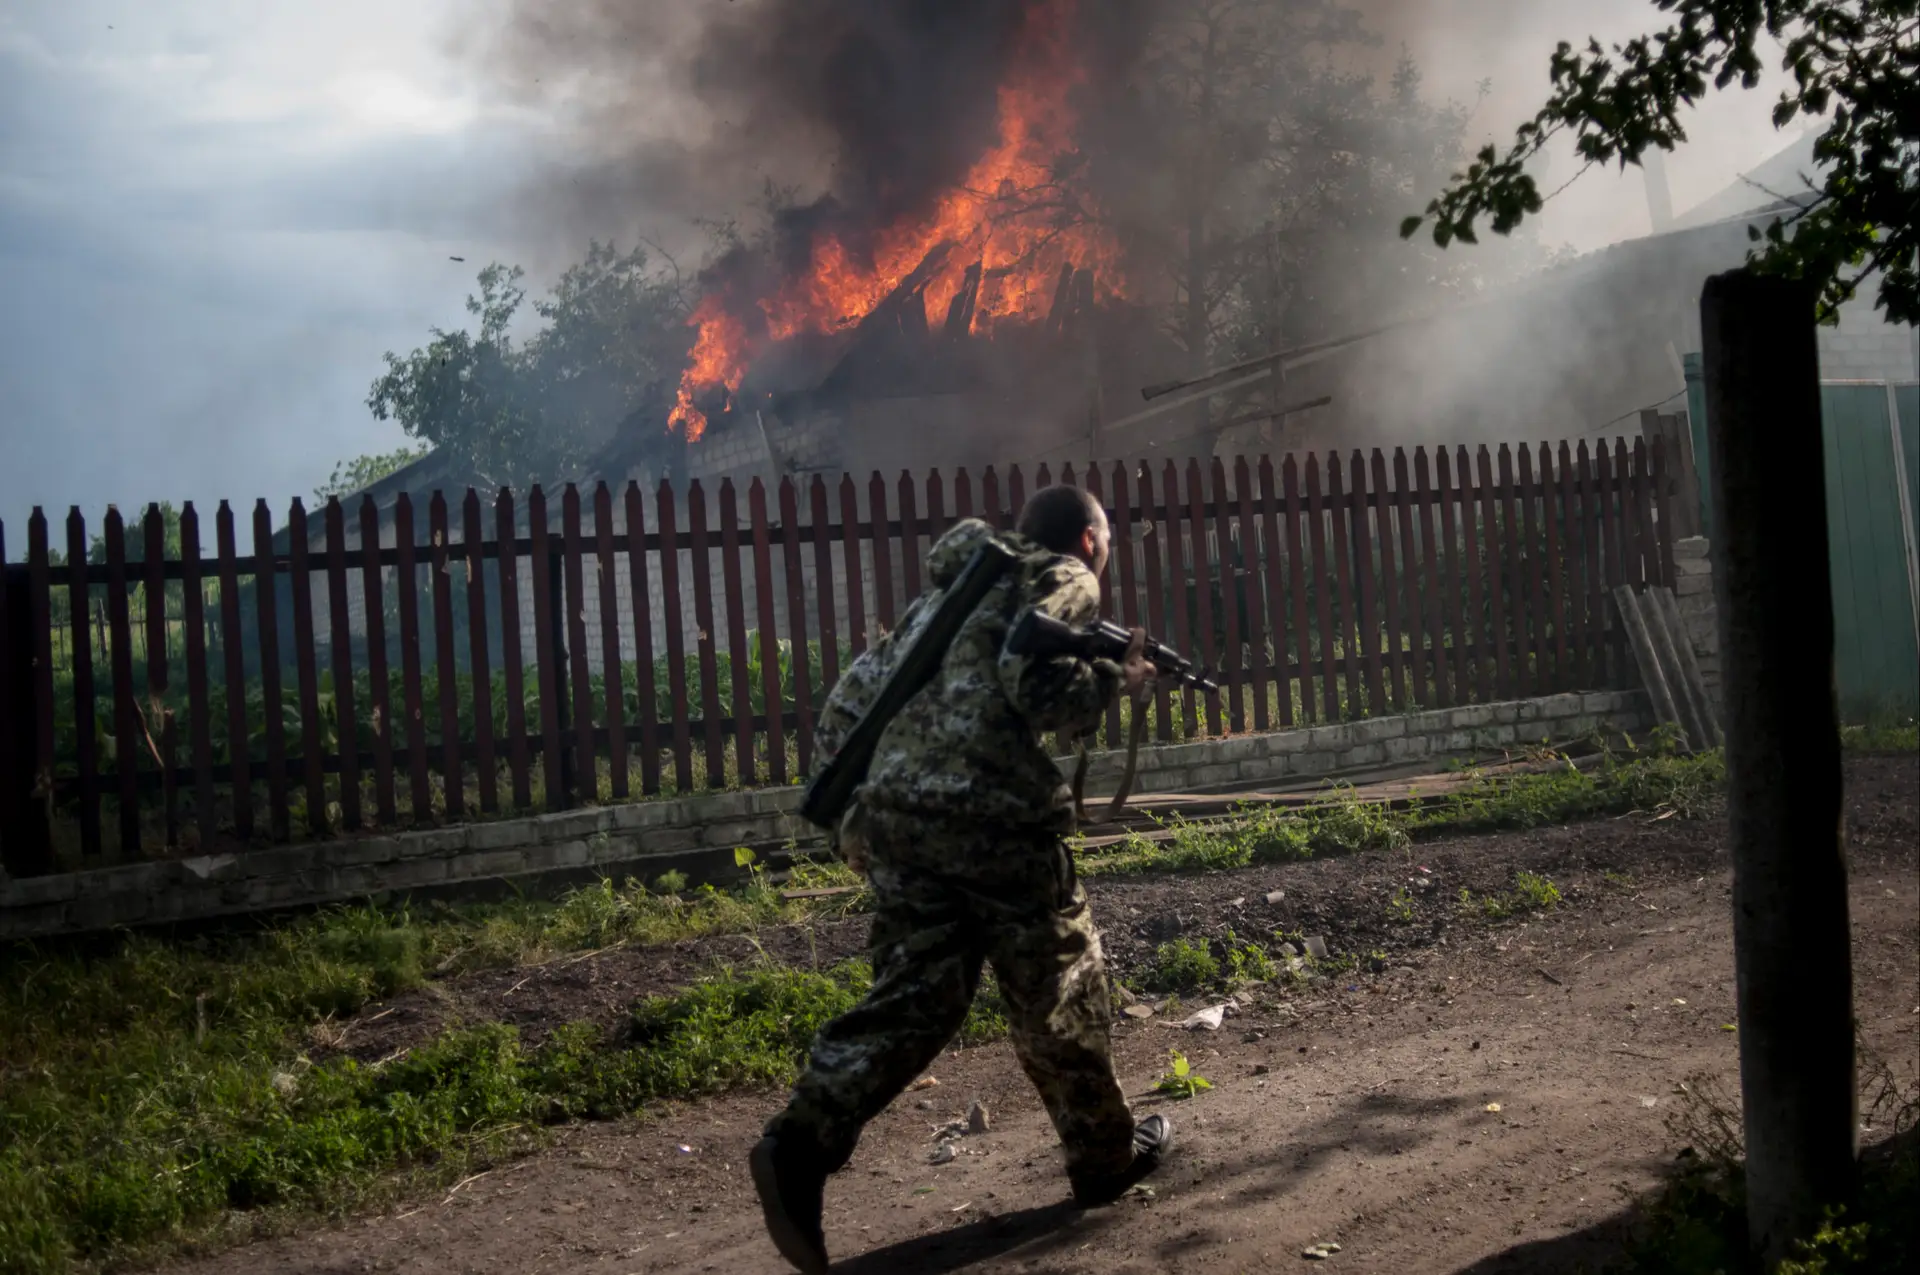 A pro-Russian armed man runs past a burning house after it was set on fire by a mortar shell, on the outskirts of the town of Lysychansk, Ukraine, on Thursday, May 22, 2014. In the eastern Luhansk region, sustained gunfire and shelling rocked the town of Lysychansk. One mortar bomb hit a house, which burst into flames. Earlier today at least 11 Ukrainian troops were killed and about 30 others were wounded during an attack at a military checkpoint, the deadliest raid in the weeks of fighting in eastern Ukraine. (AP Photo/Evgeniy Maloletka)